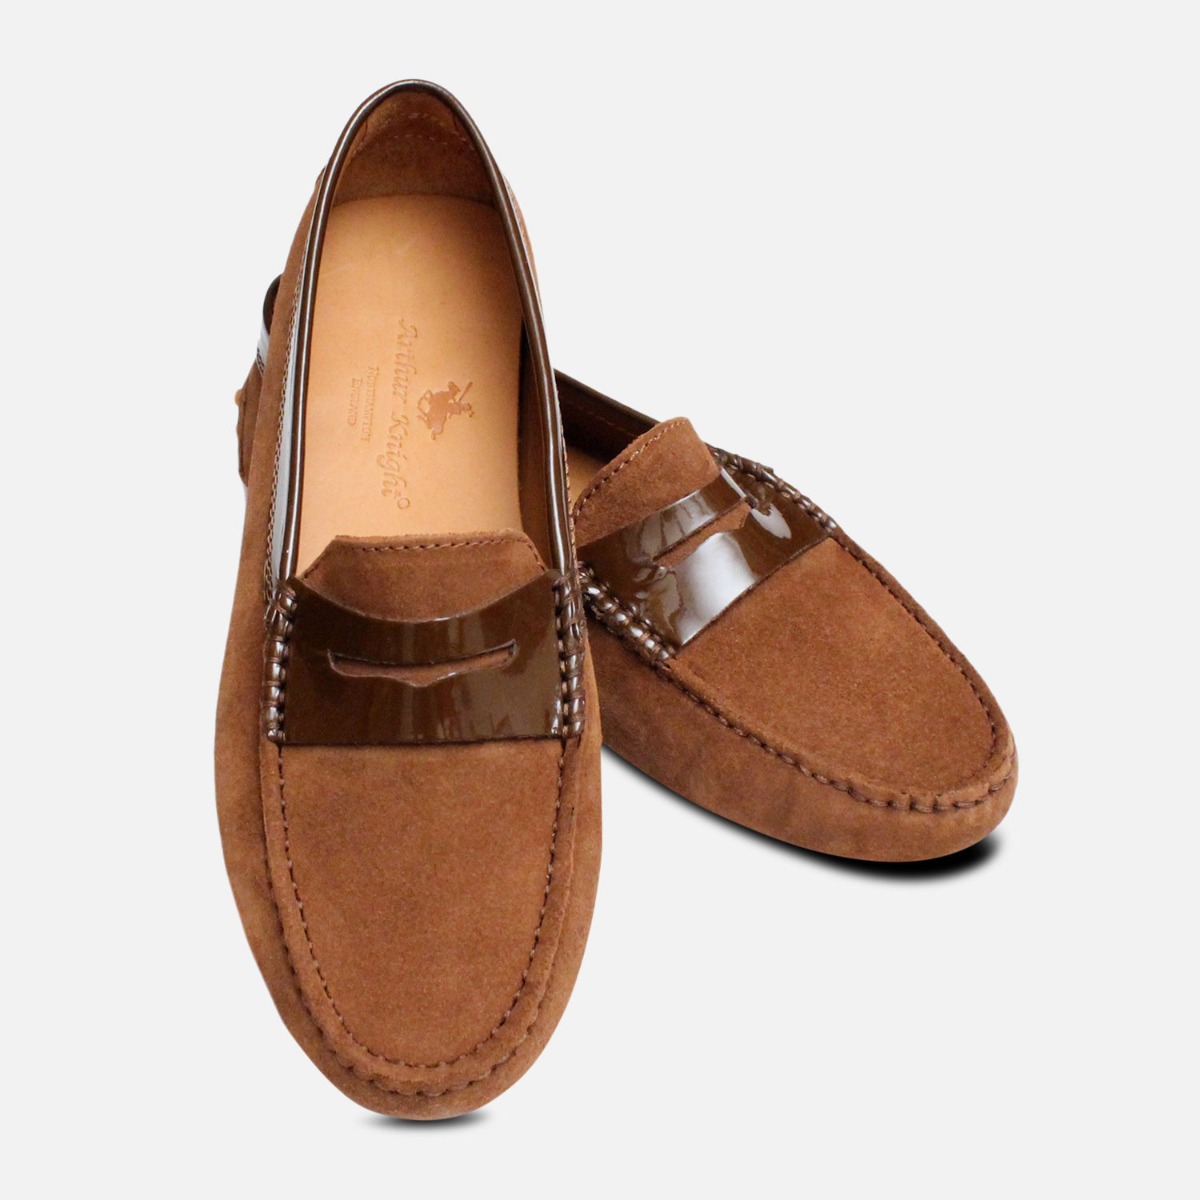 Whisky Brown Suede Italian Driving Shoe Moccasins | eBay